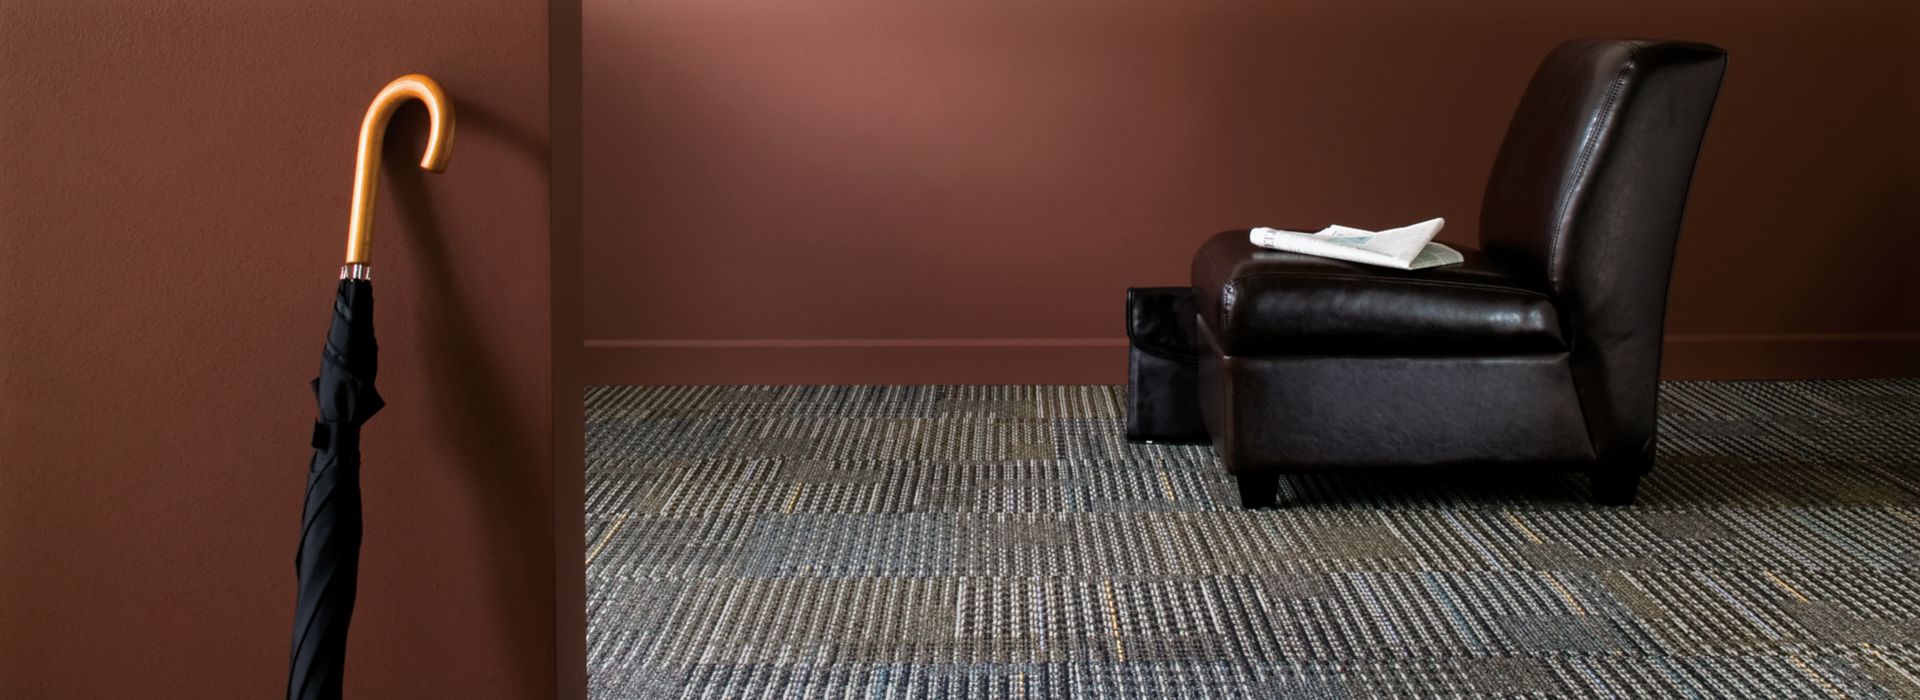 Interface Cotswold II carpet tile with black chair and umbrella